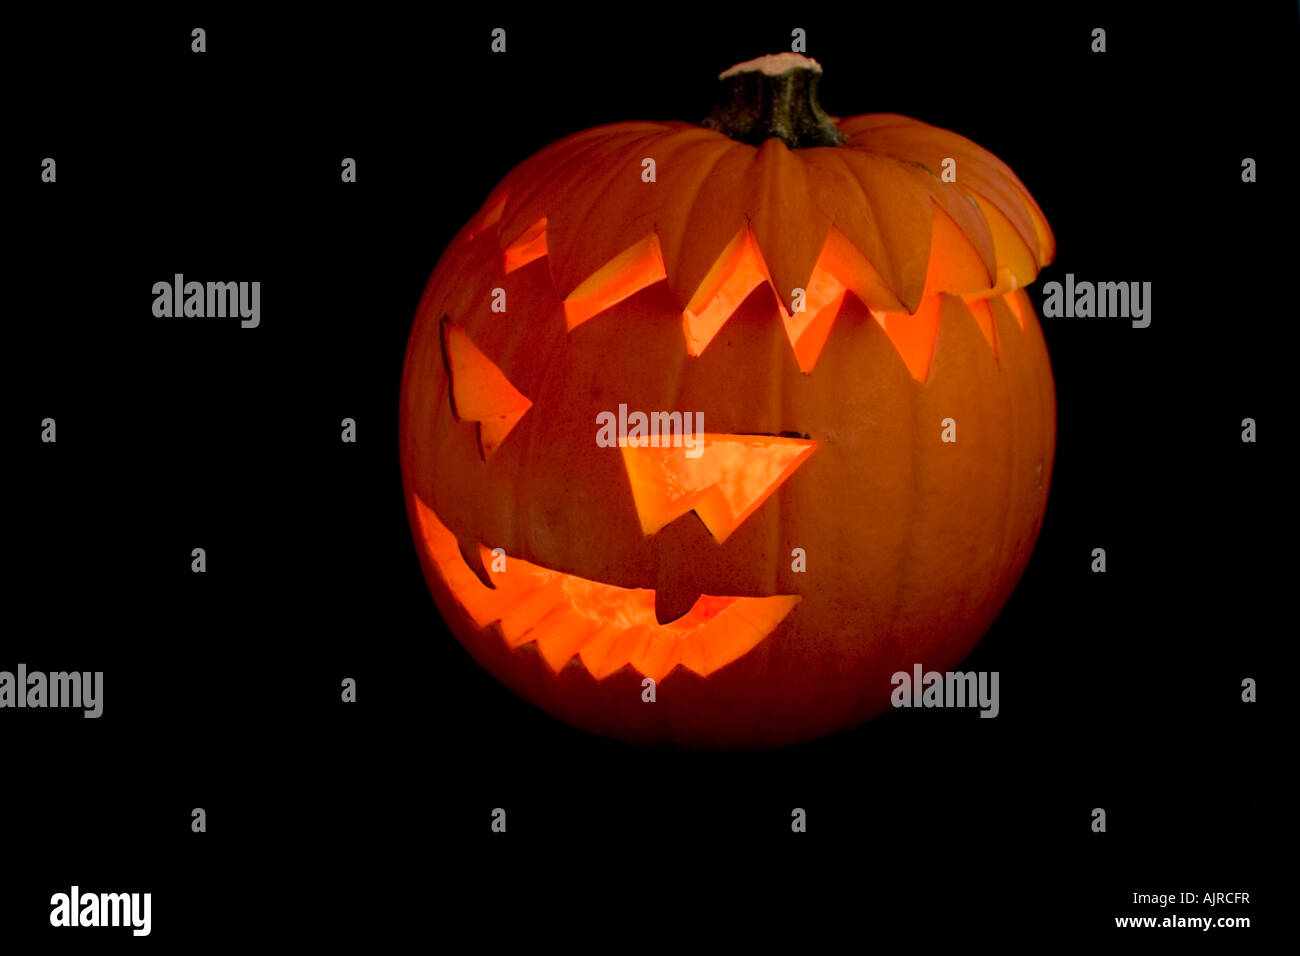 Halloween Orange pumpkin head lit by candle on a black background Stock Photo